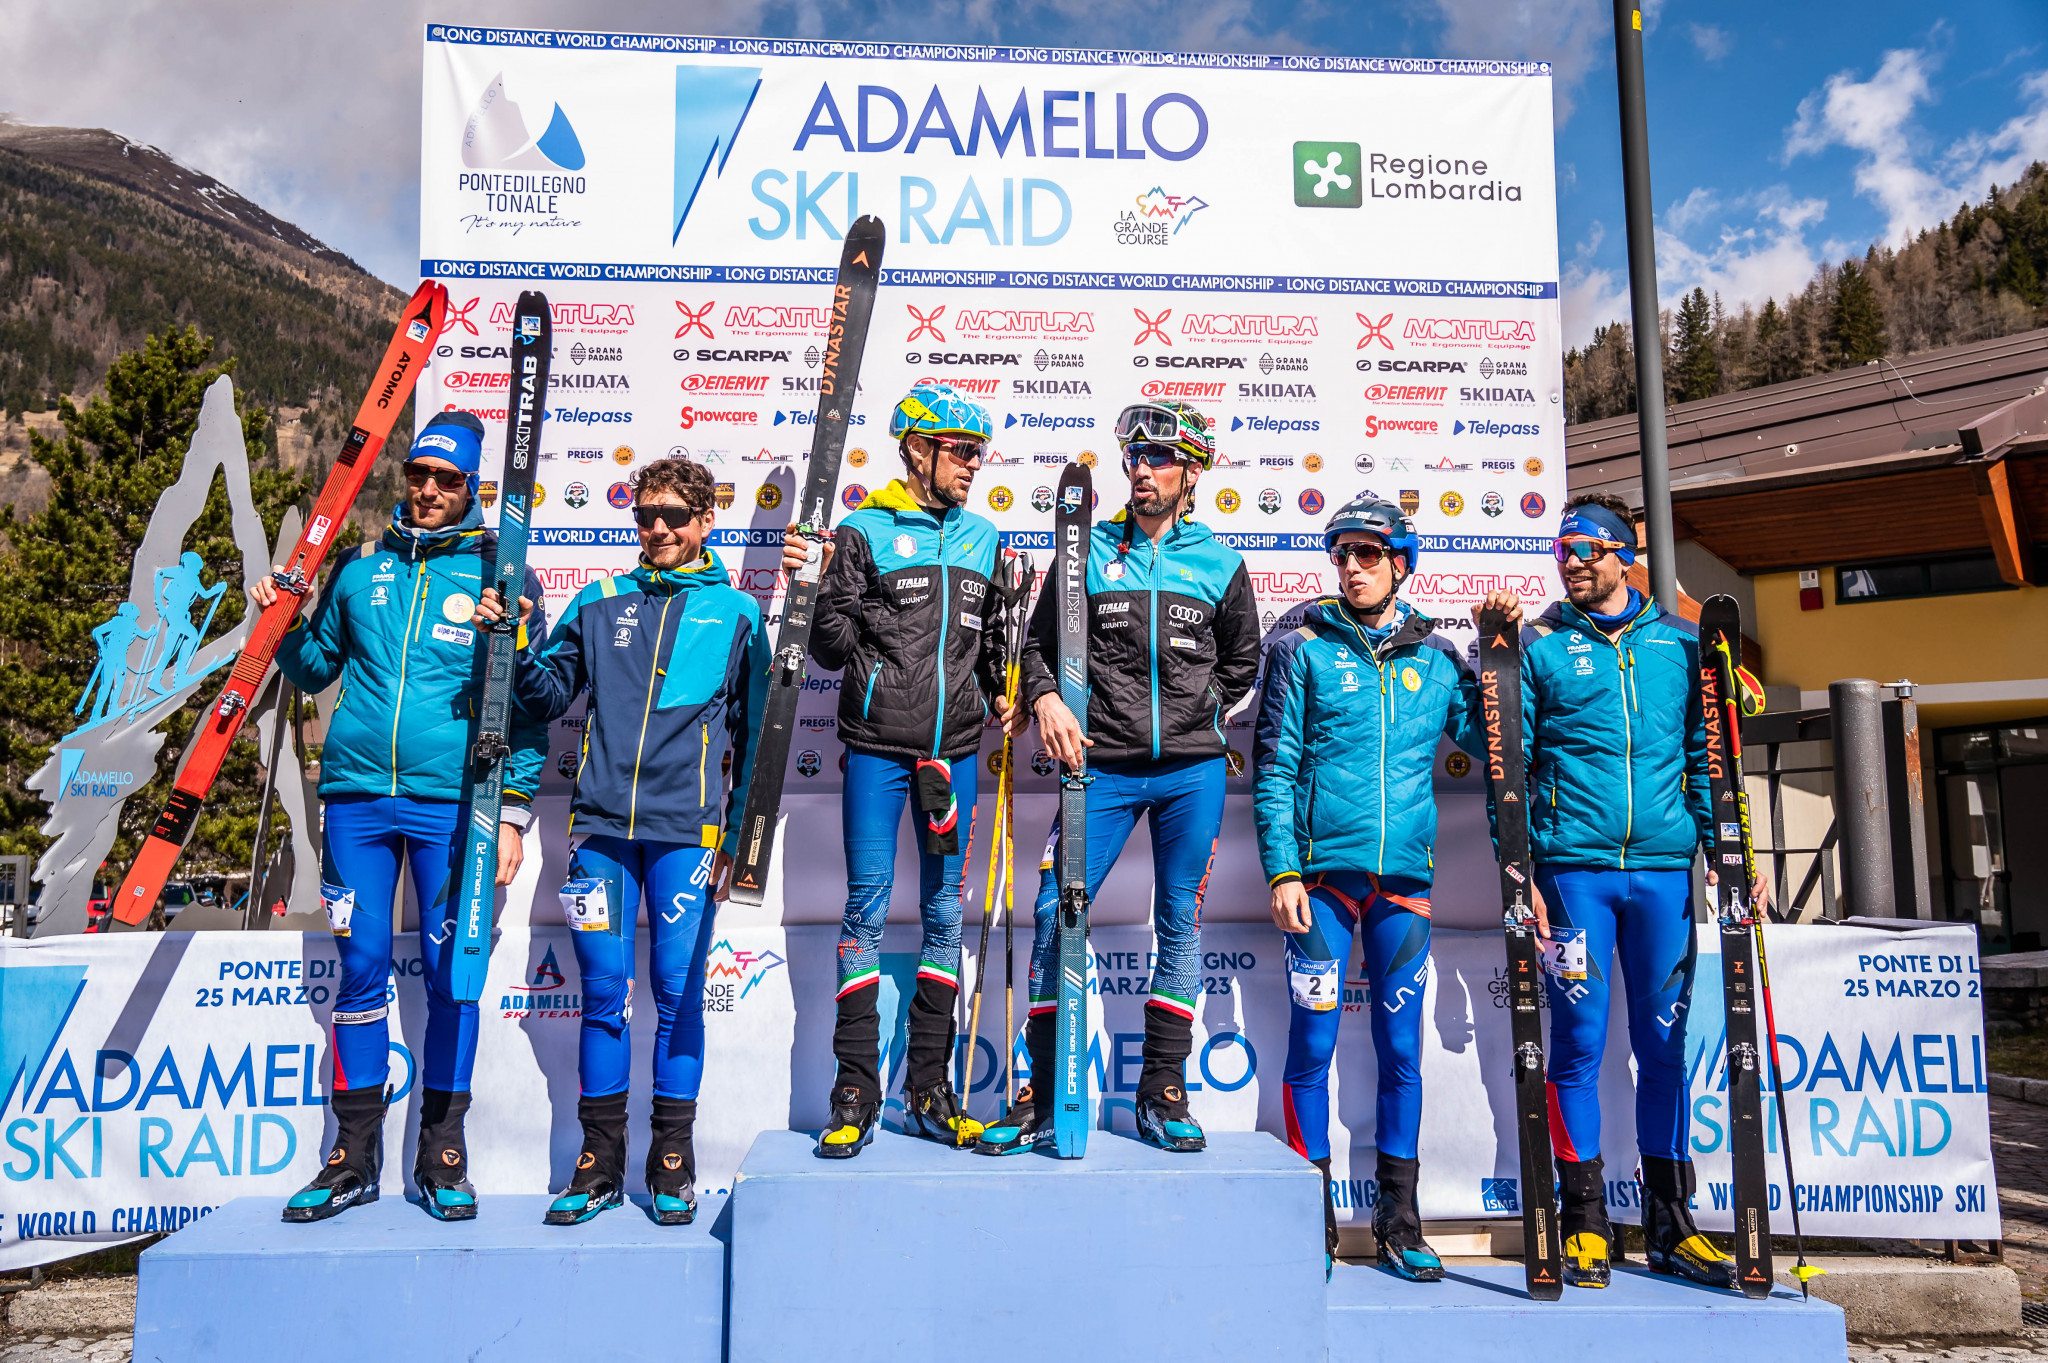 Robert Antonioli and Matteo Eydallin claimed the men's title to win their second World Championship crown this month ©ISMF